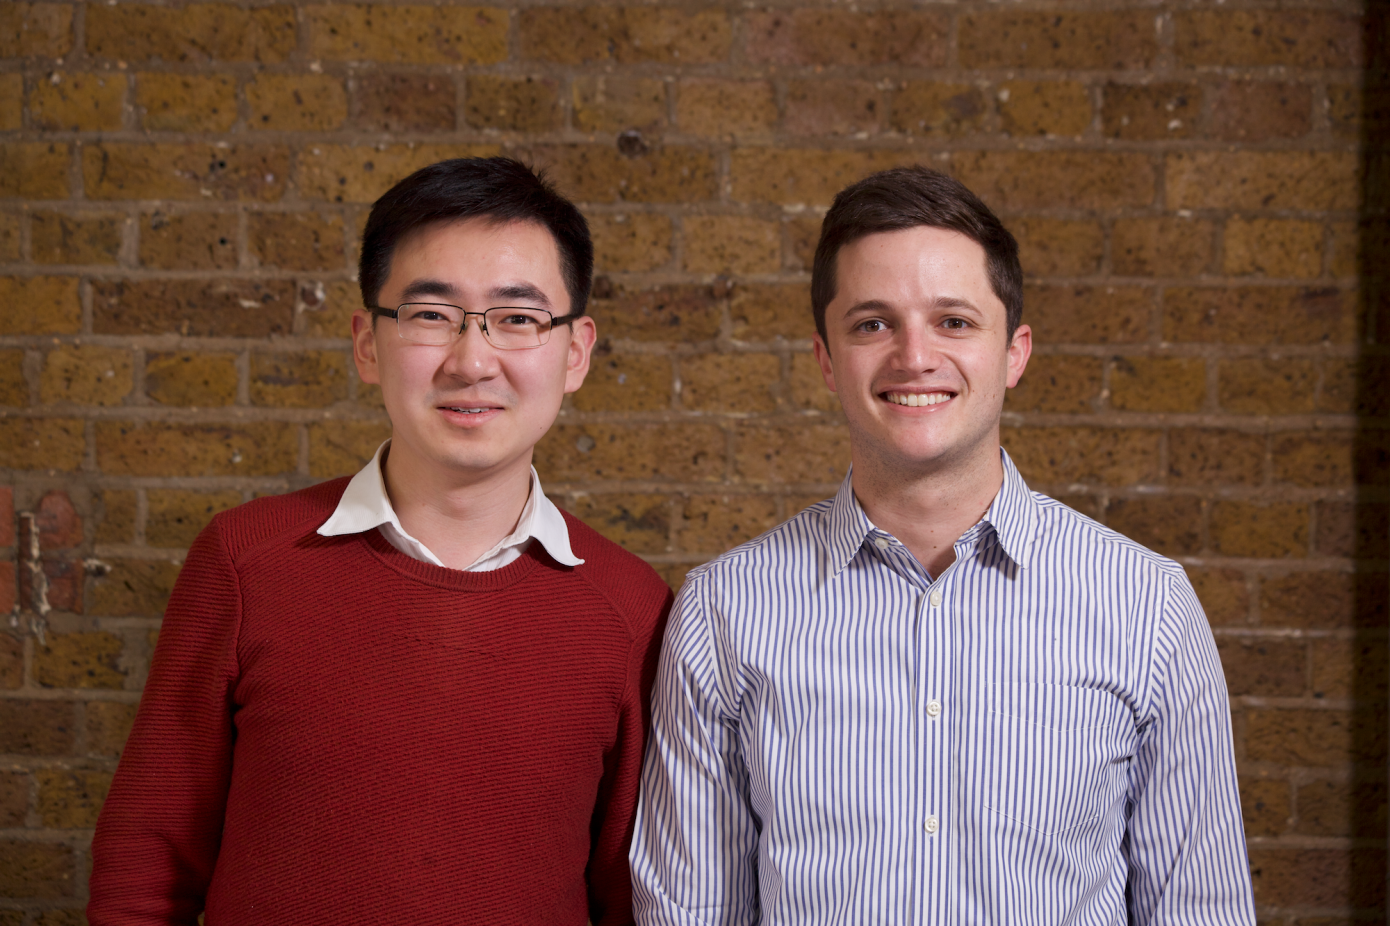 GetCallers | Papercup, the UK startup using AI for realistic-sounding voice translation, raises £8M funding